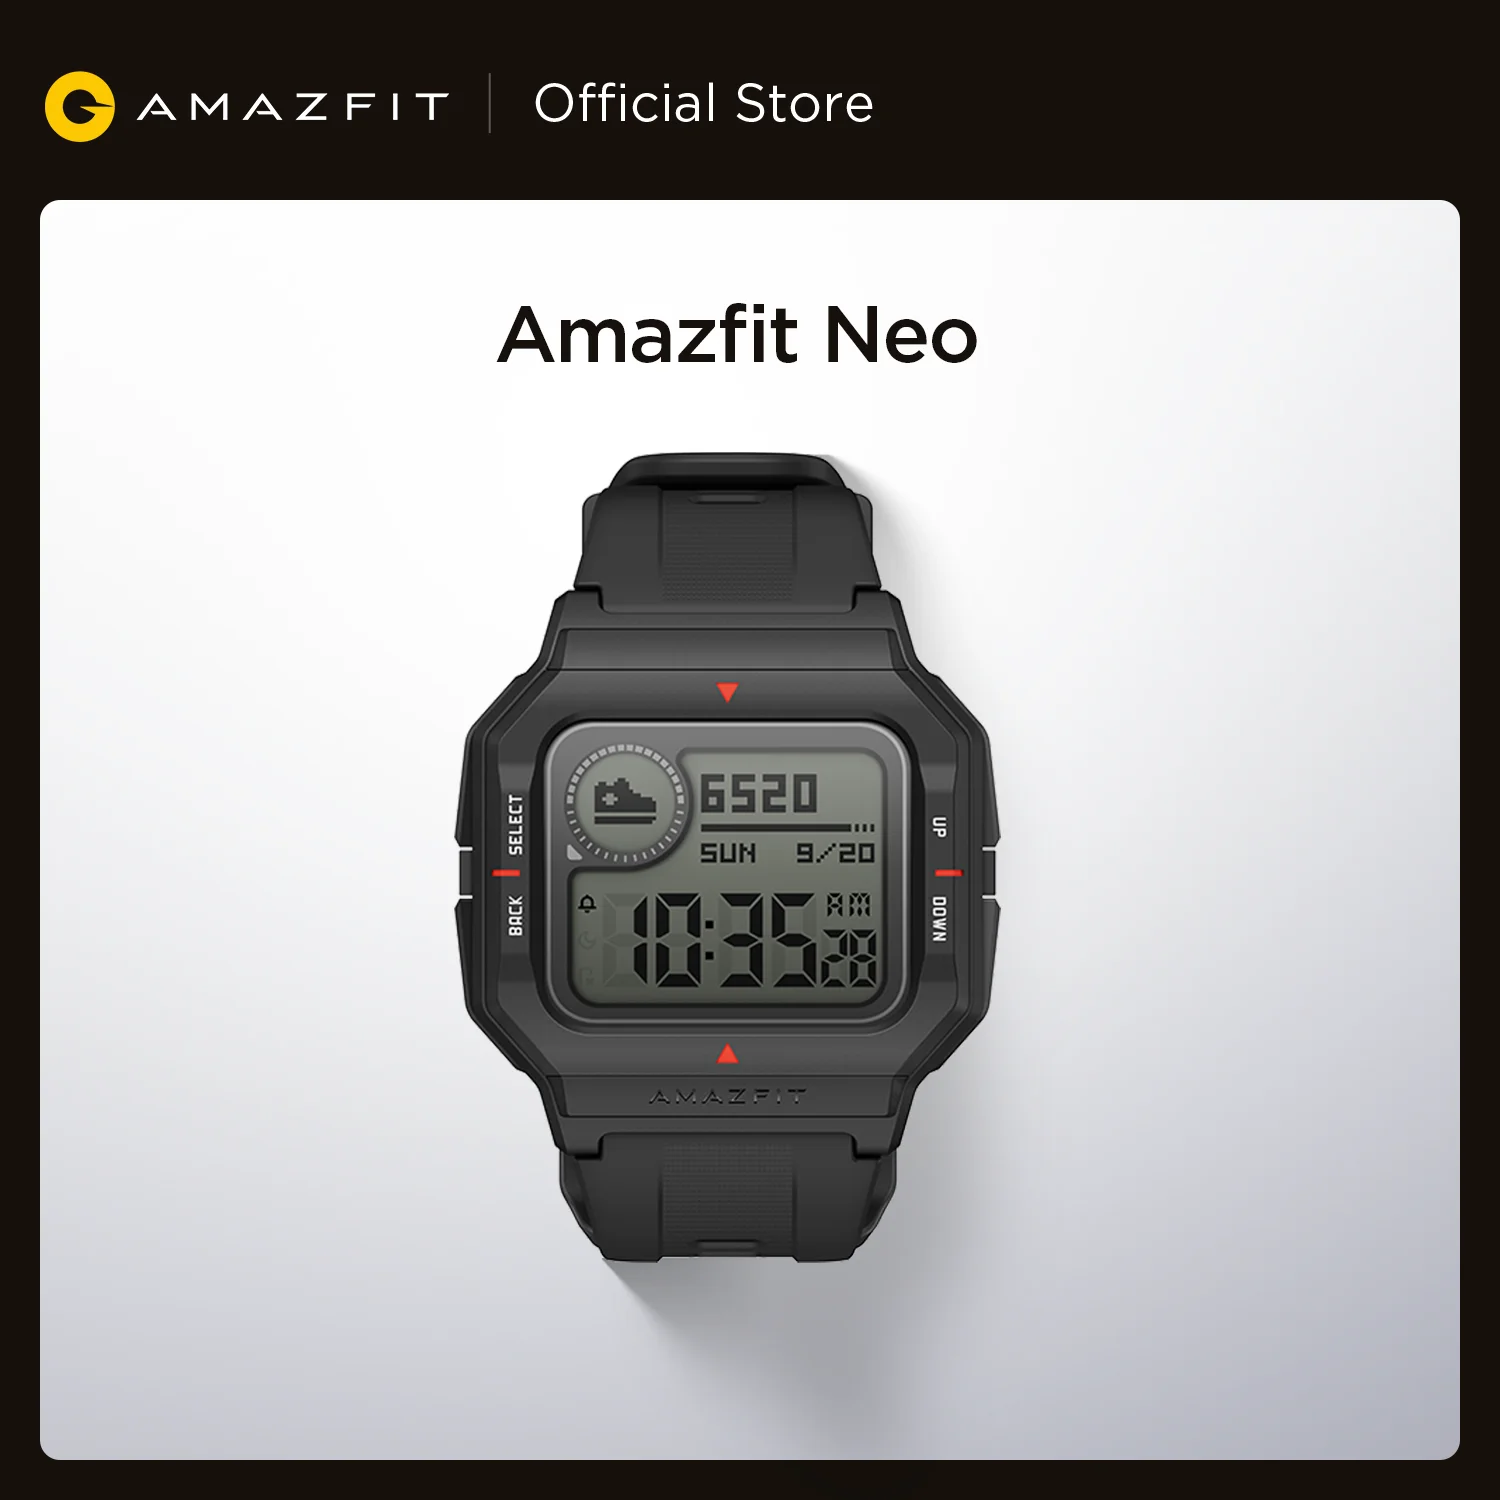 aliexpress - NEW 2020 Amazfit Neo Smart Watch Bluetooth Smartwatch 5ATM Tracking 28Days Battery Life Watch For Android IOS Phone